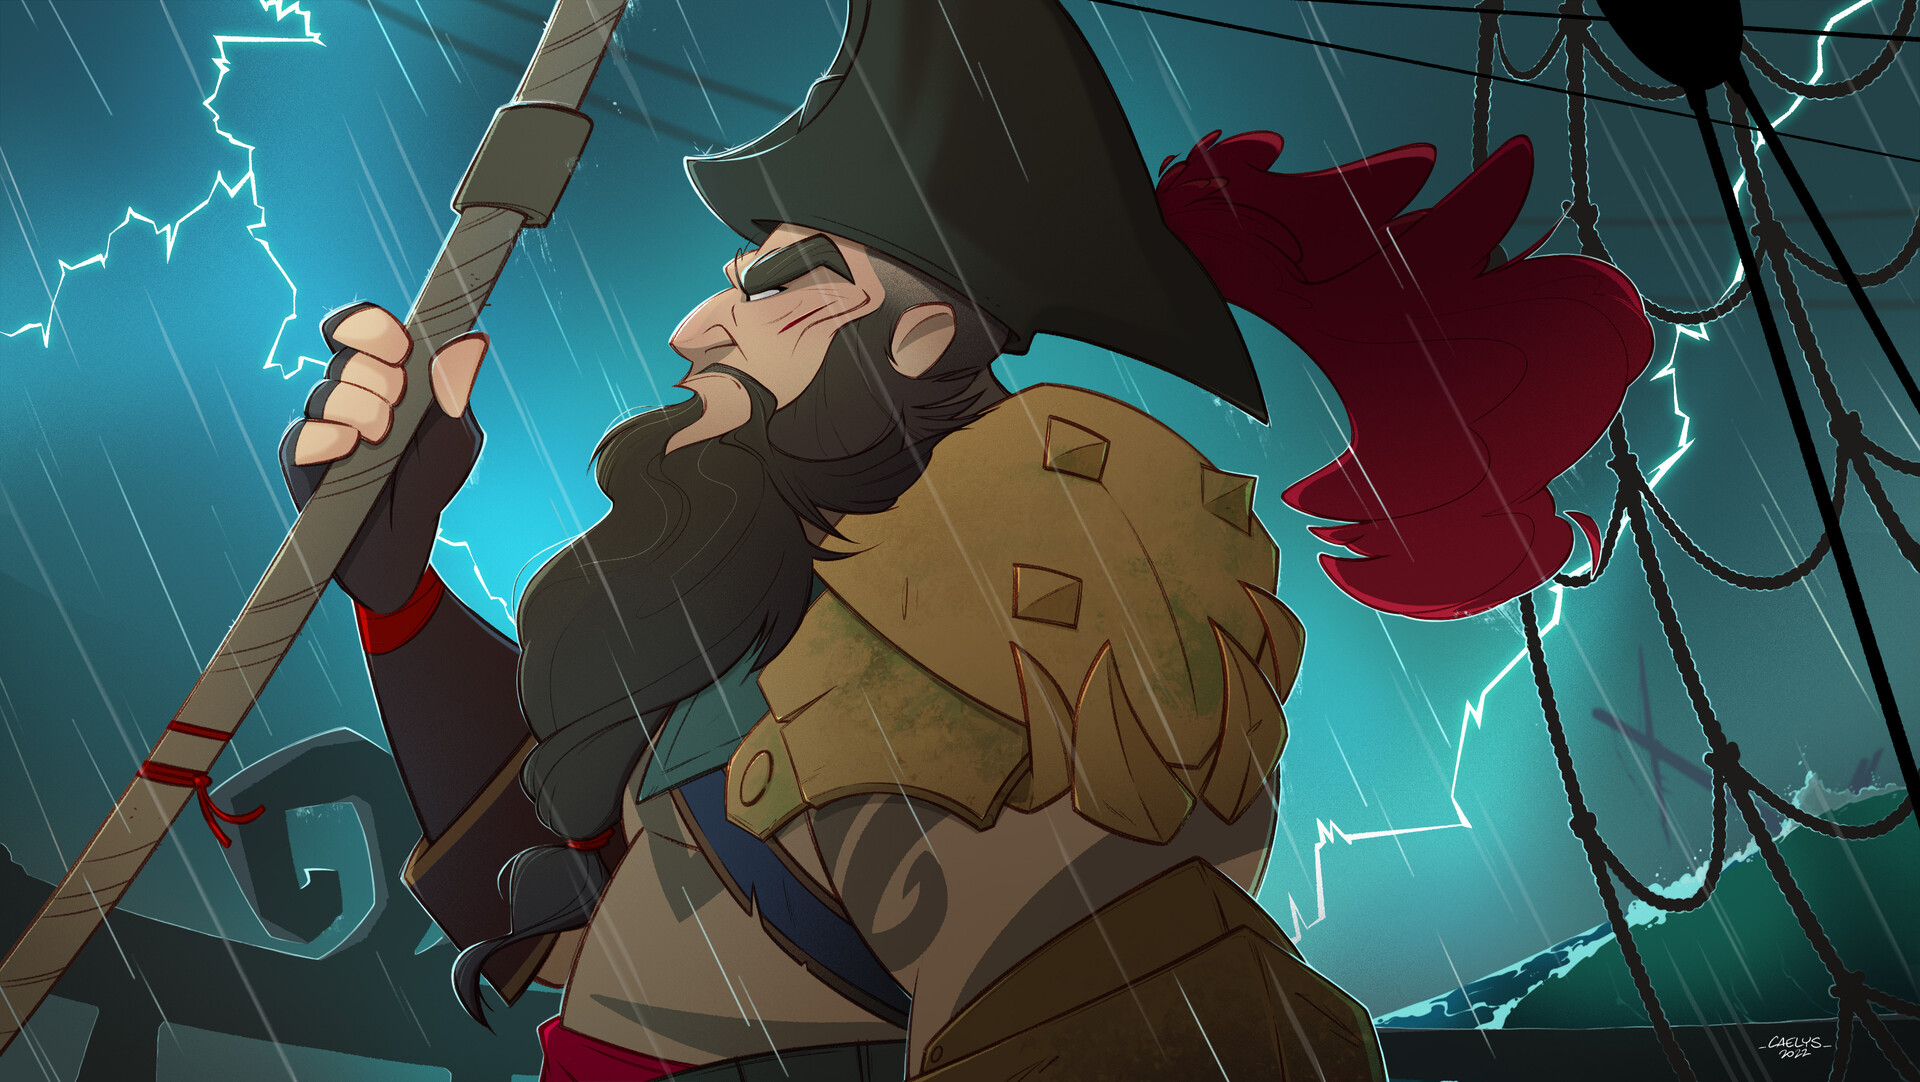 Gangplank in the Storm by Caelys